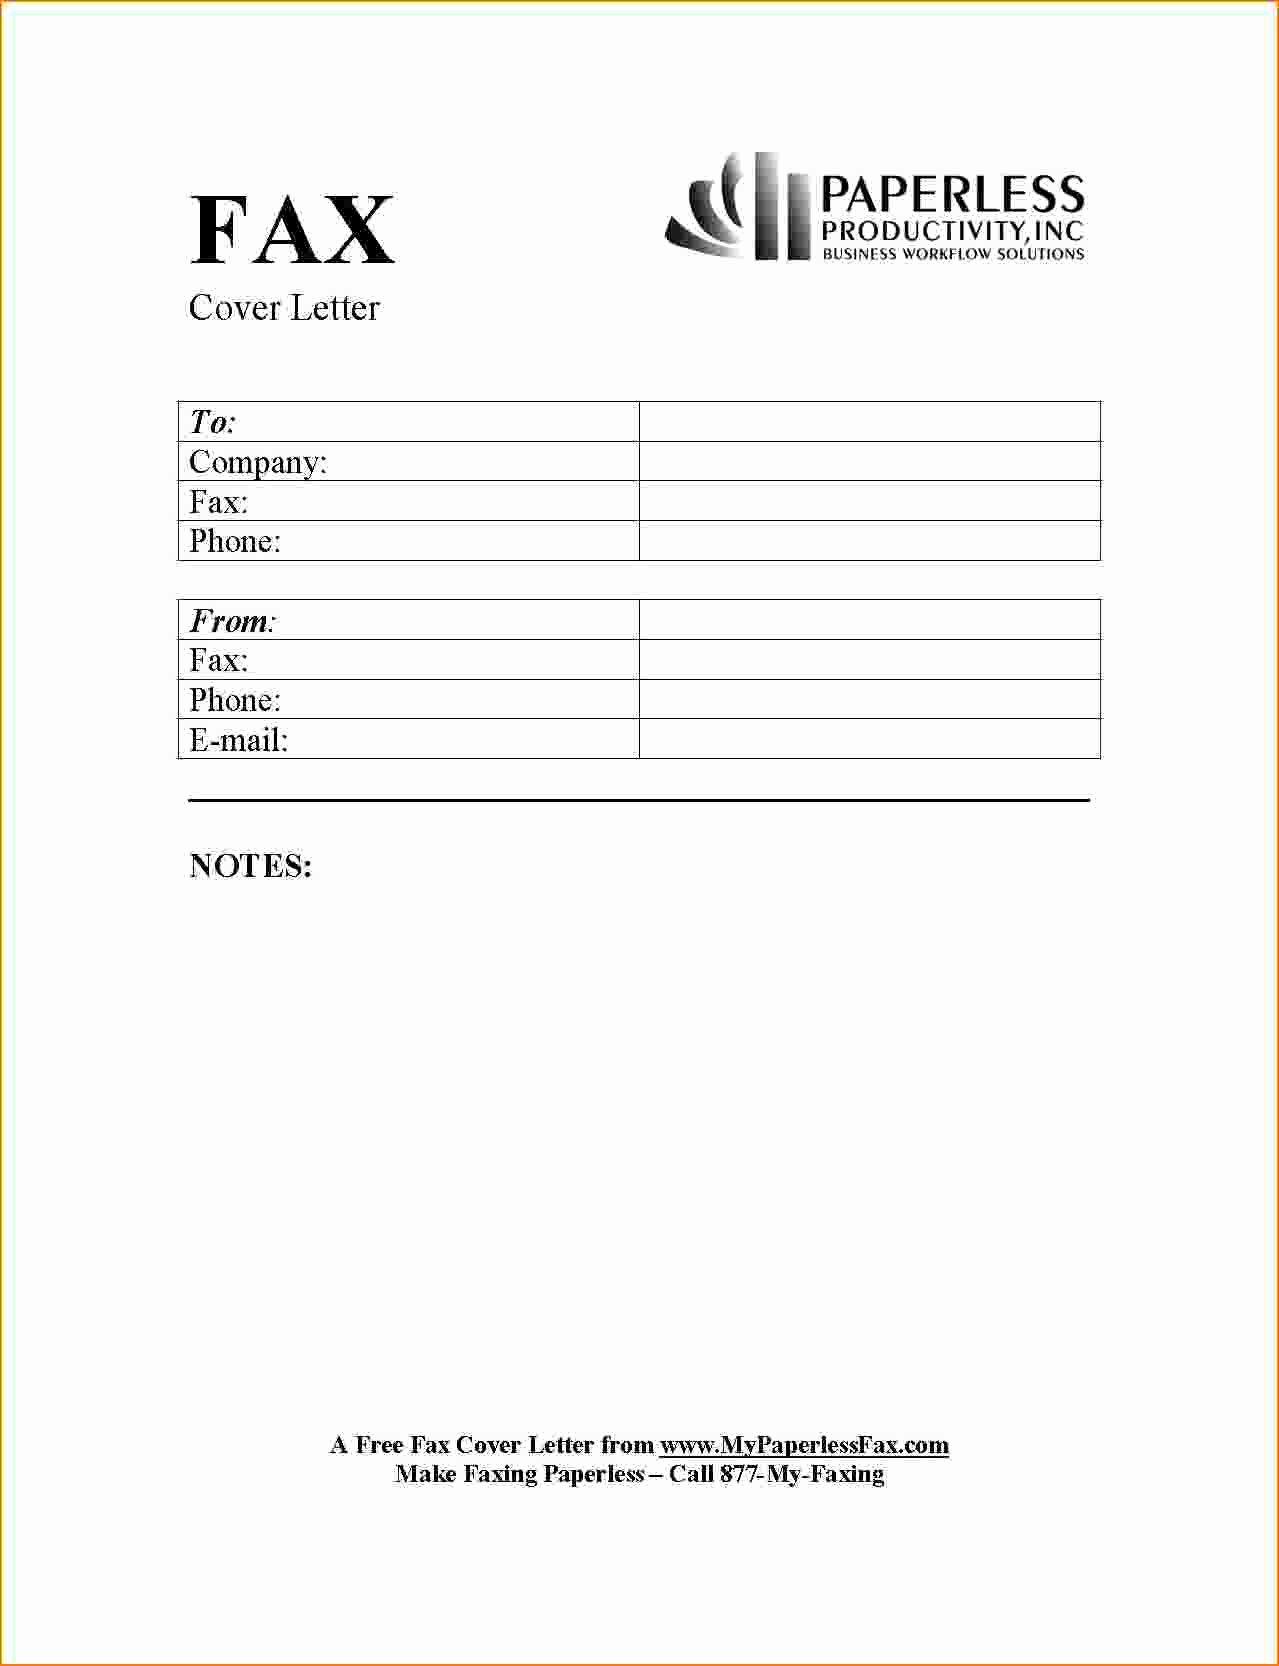 Print Fax Cover Sheet Best Of 6 Fax Cover Letter Template